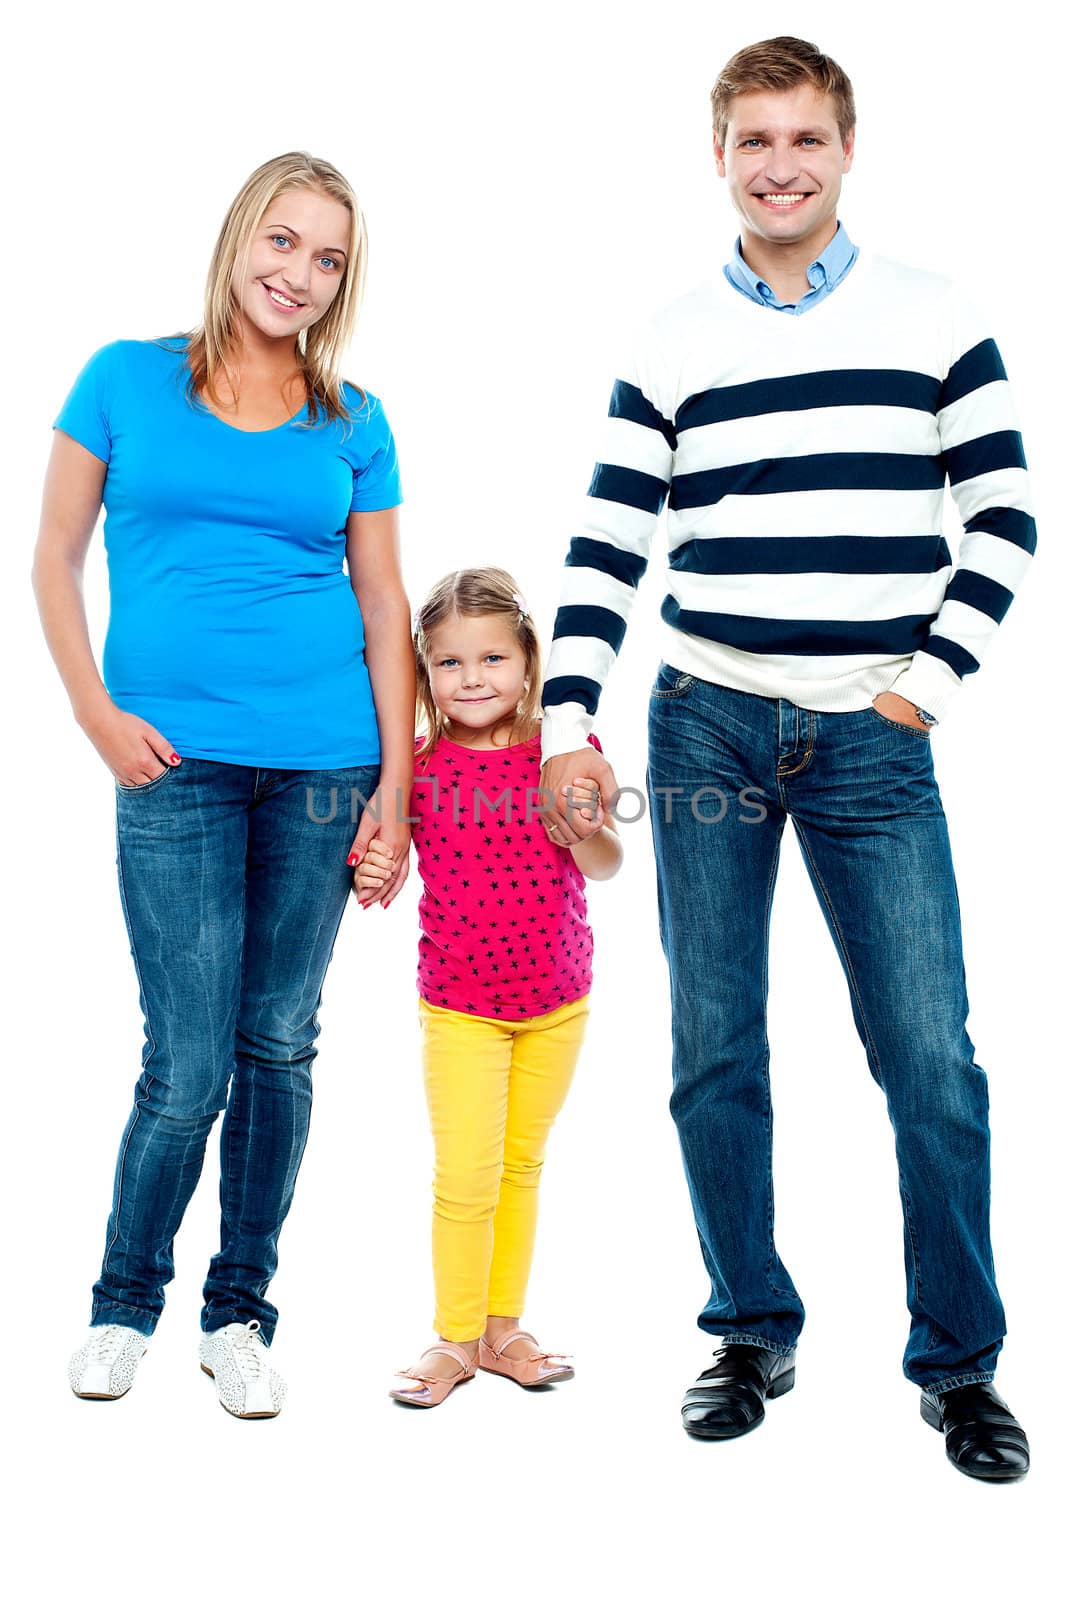 Sweet little kid standing in between her parents and holding their hands. Full length portrait